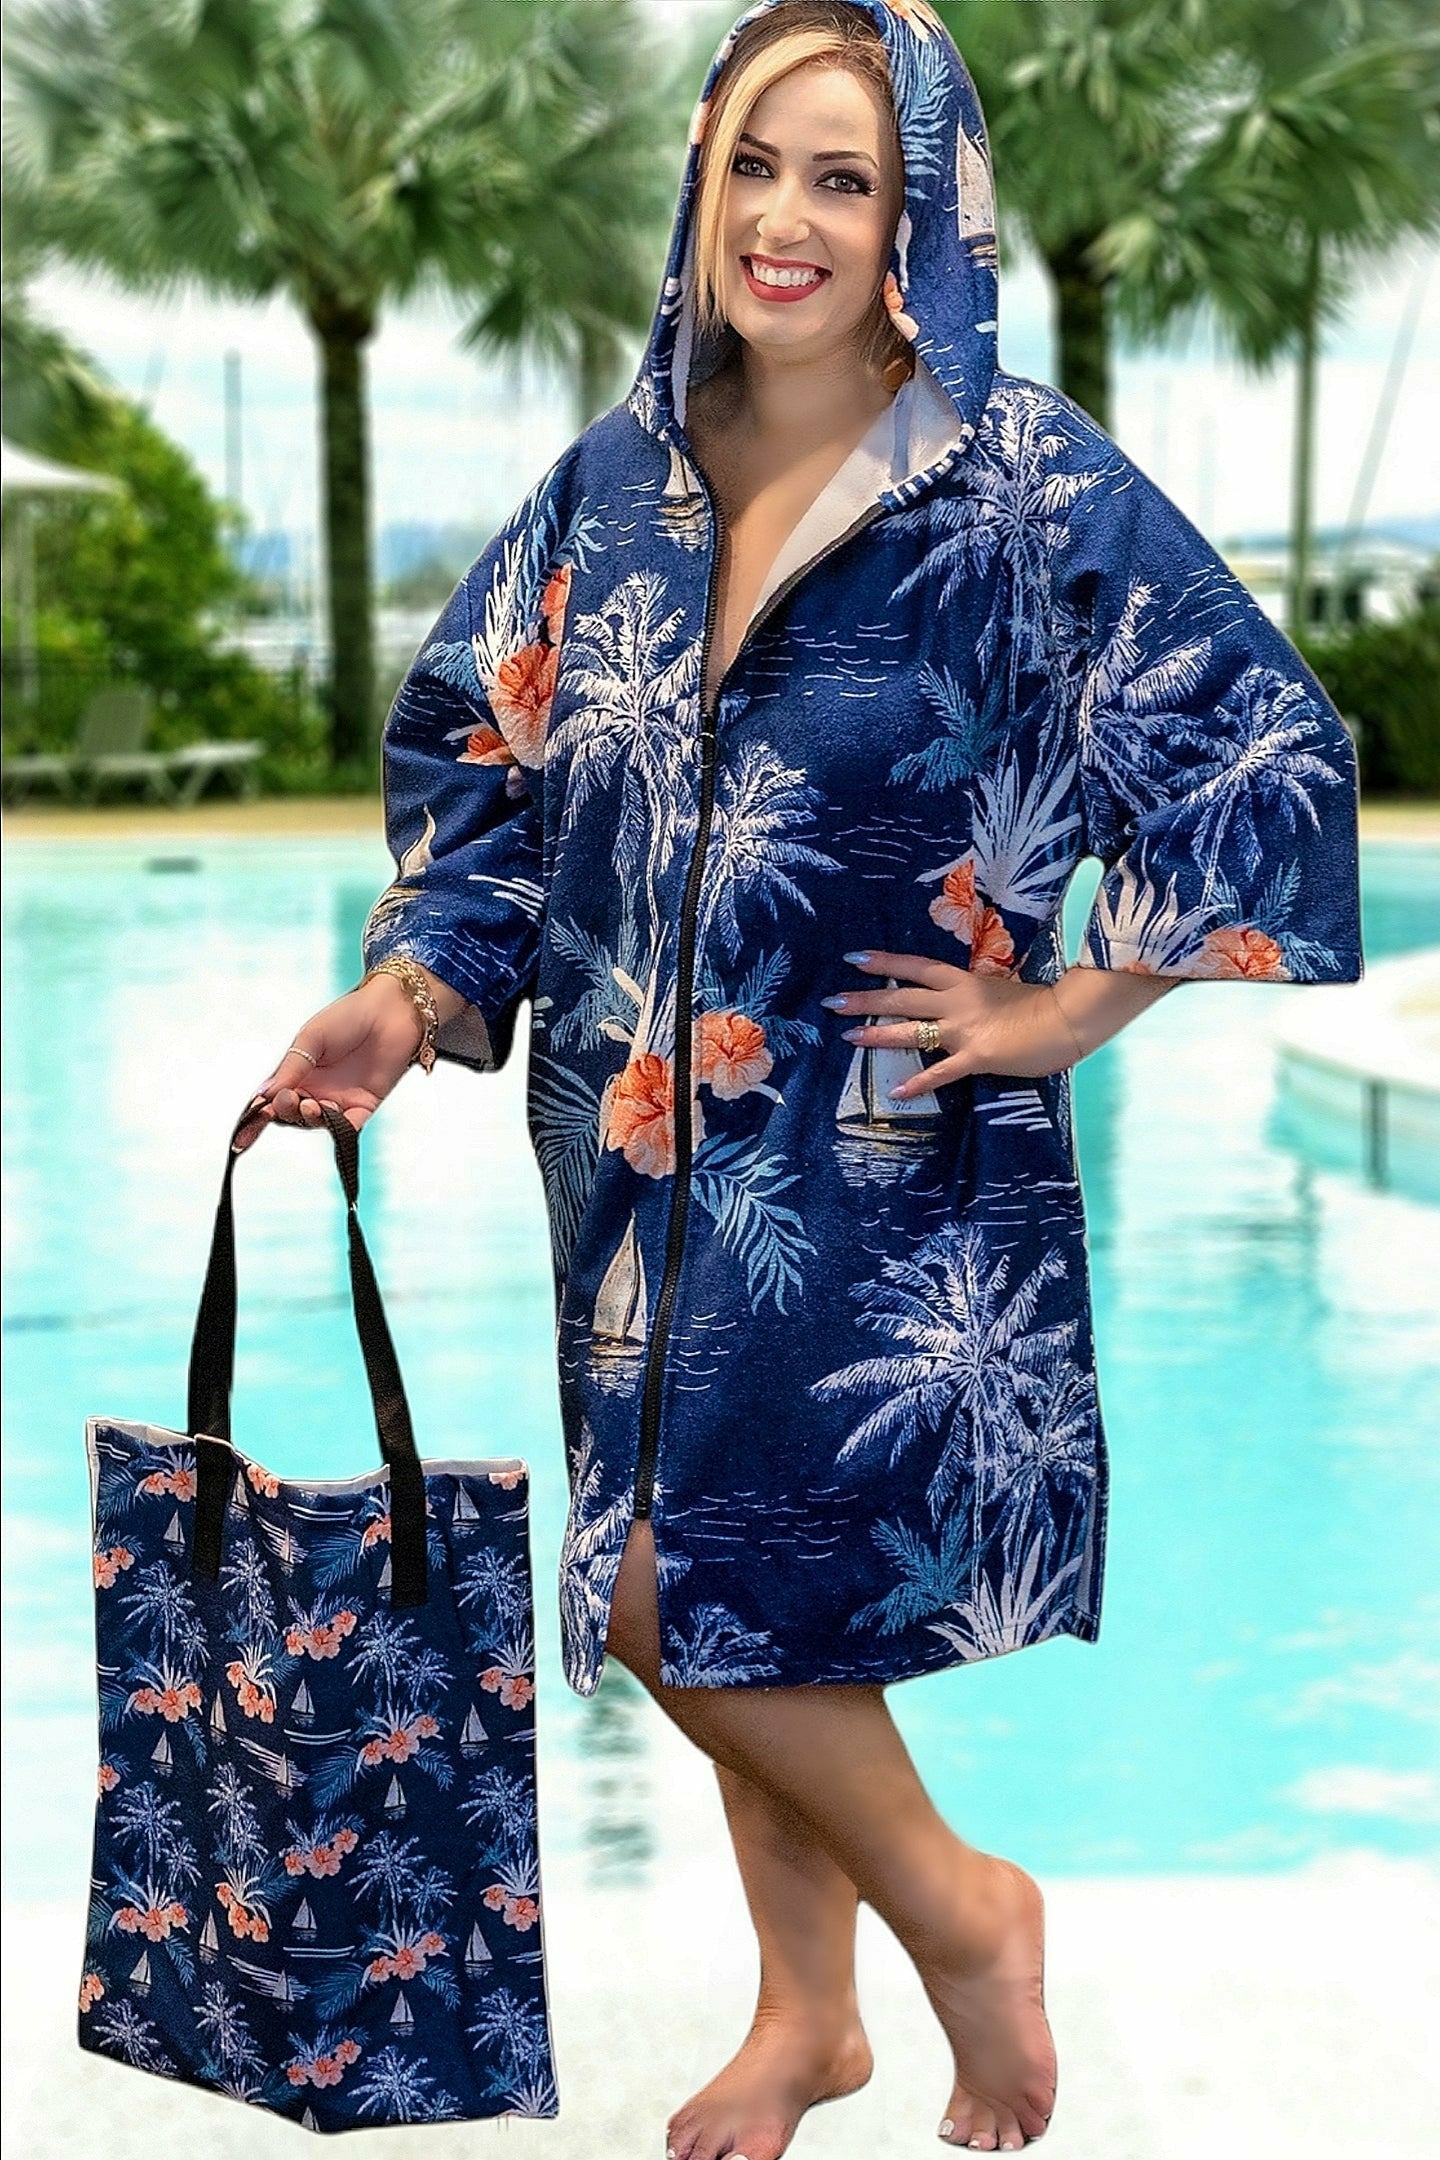 BEACH PONCHO WITH MATCHING BAG henleycollections